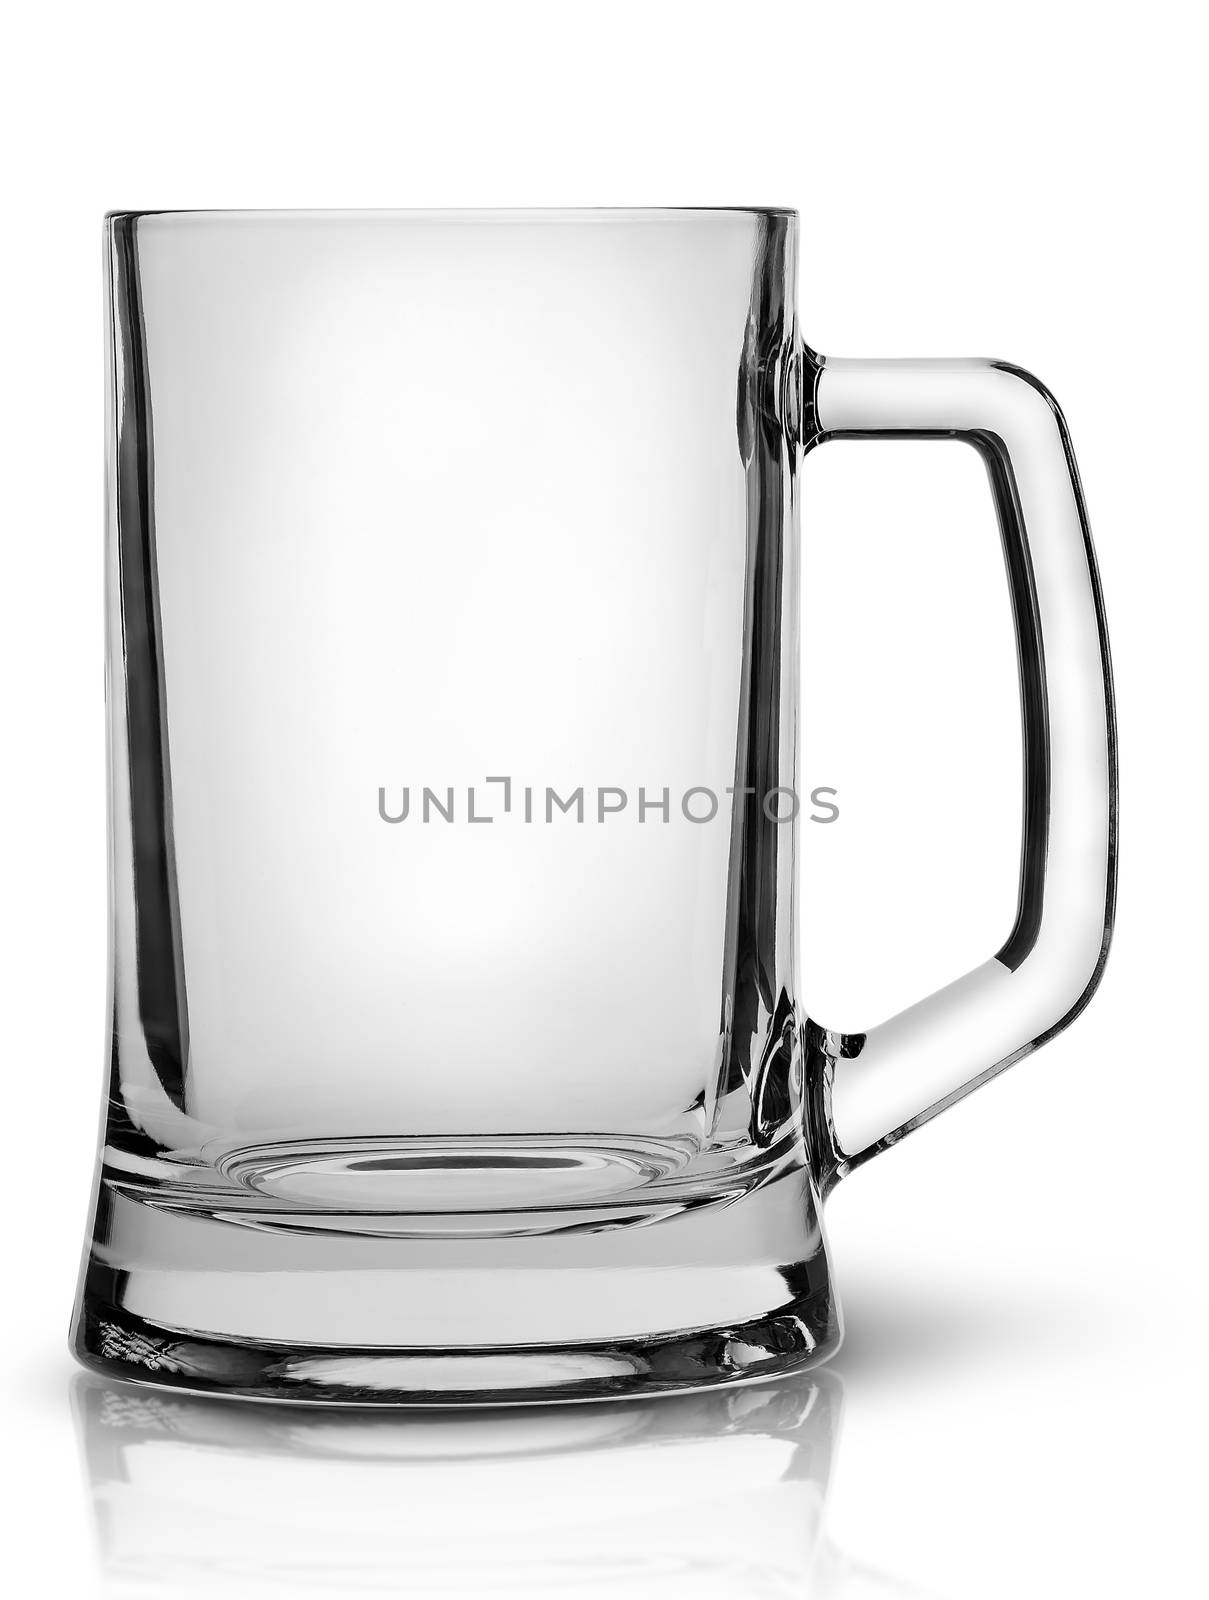 In front empty beer mug by Cipariss